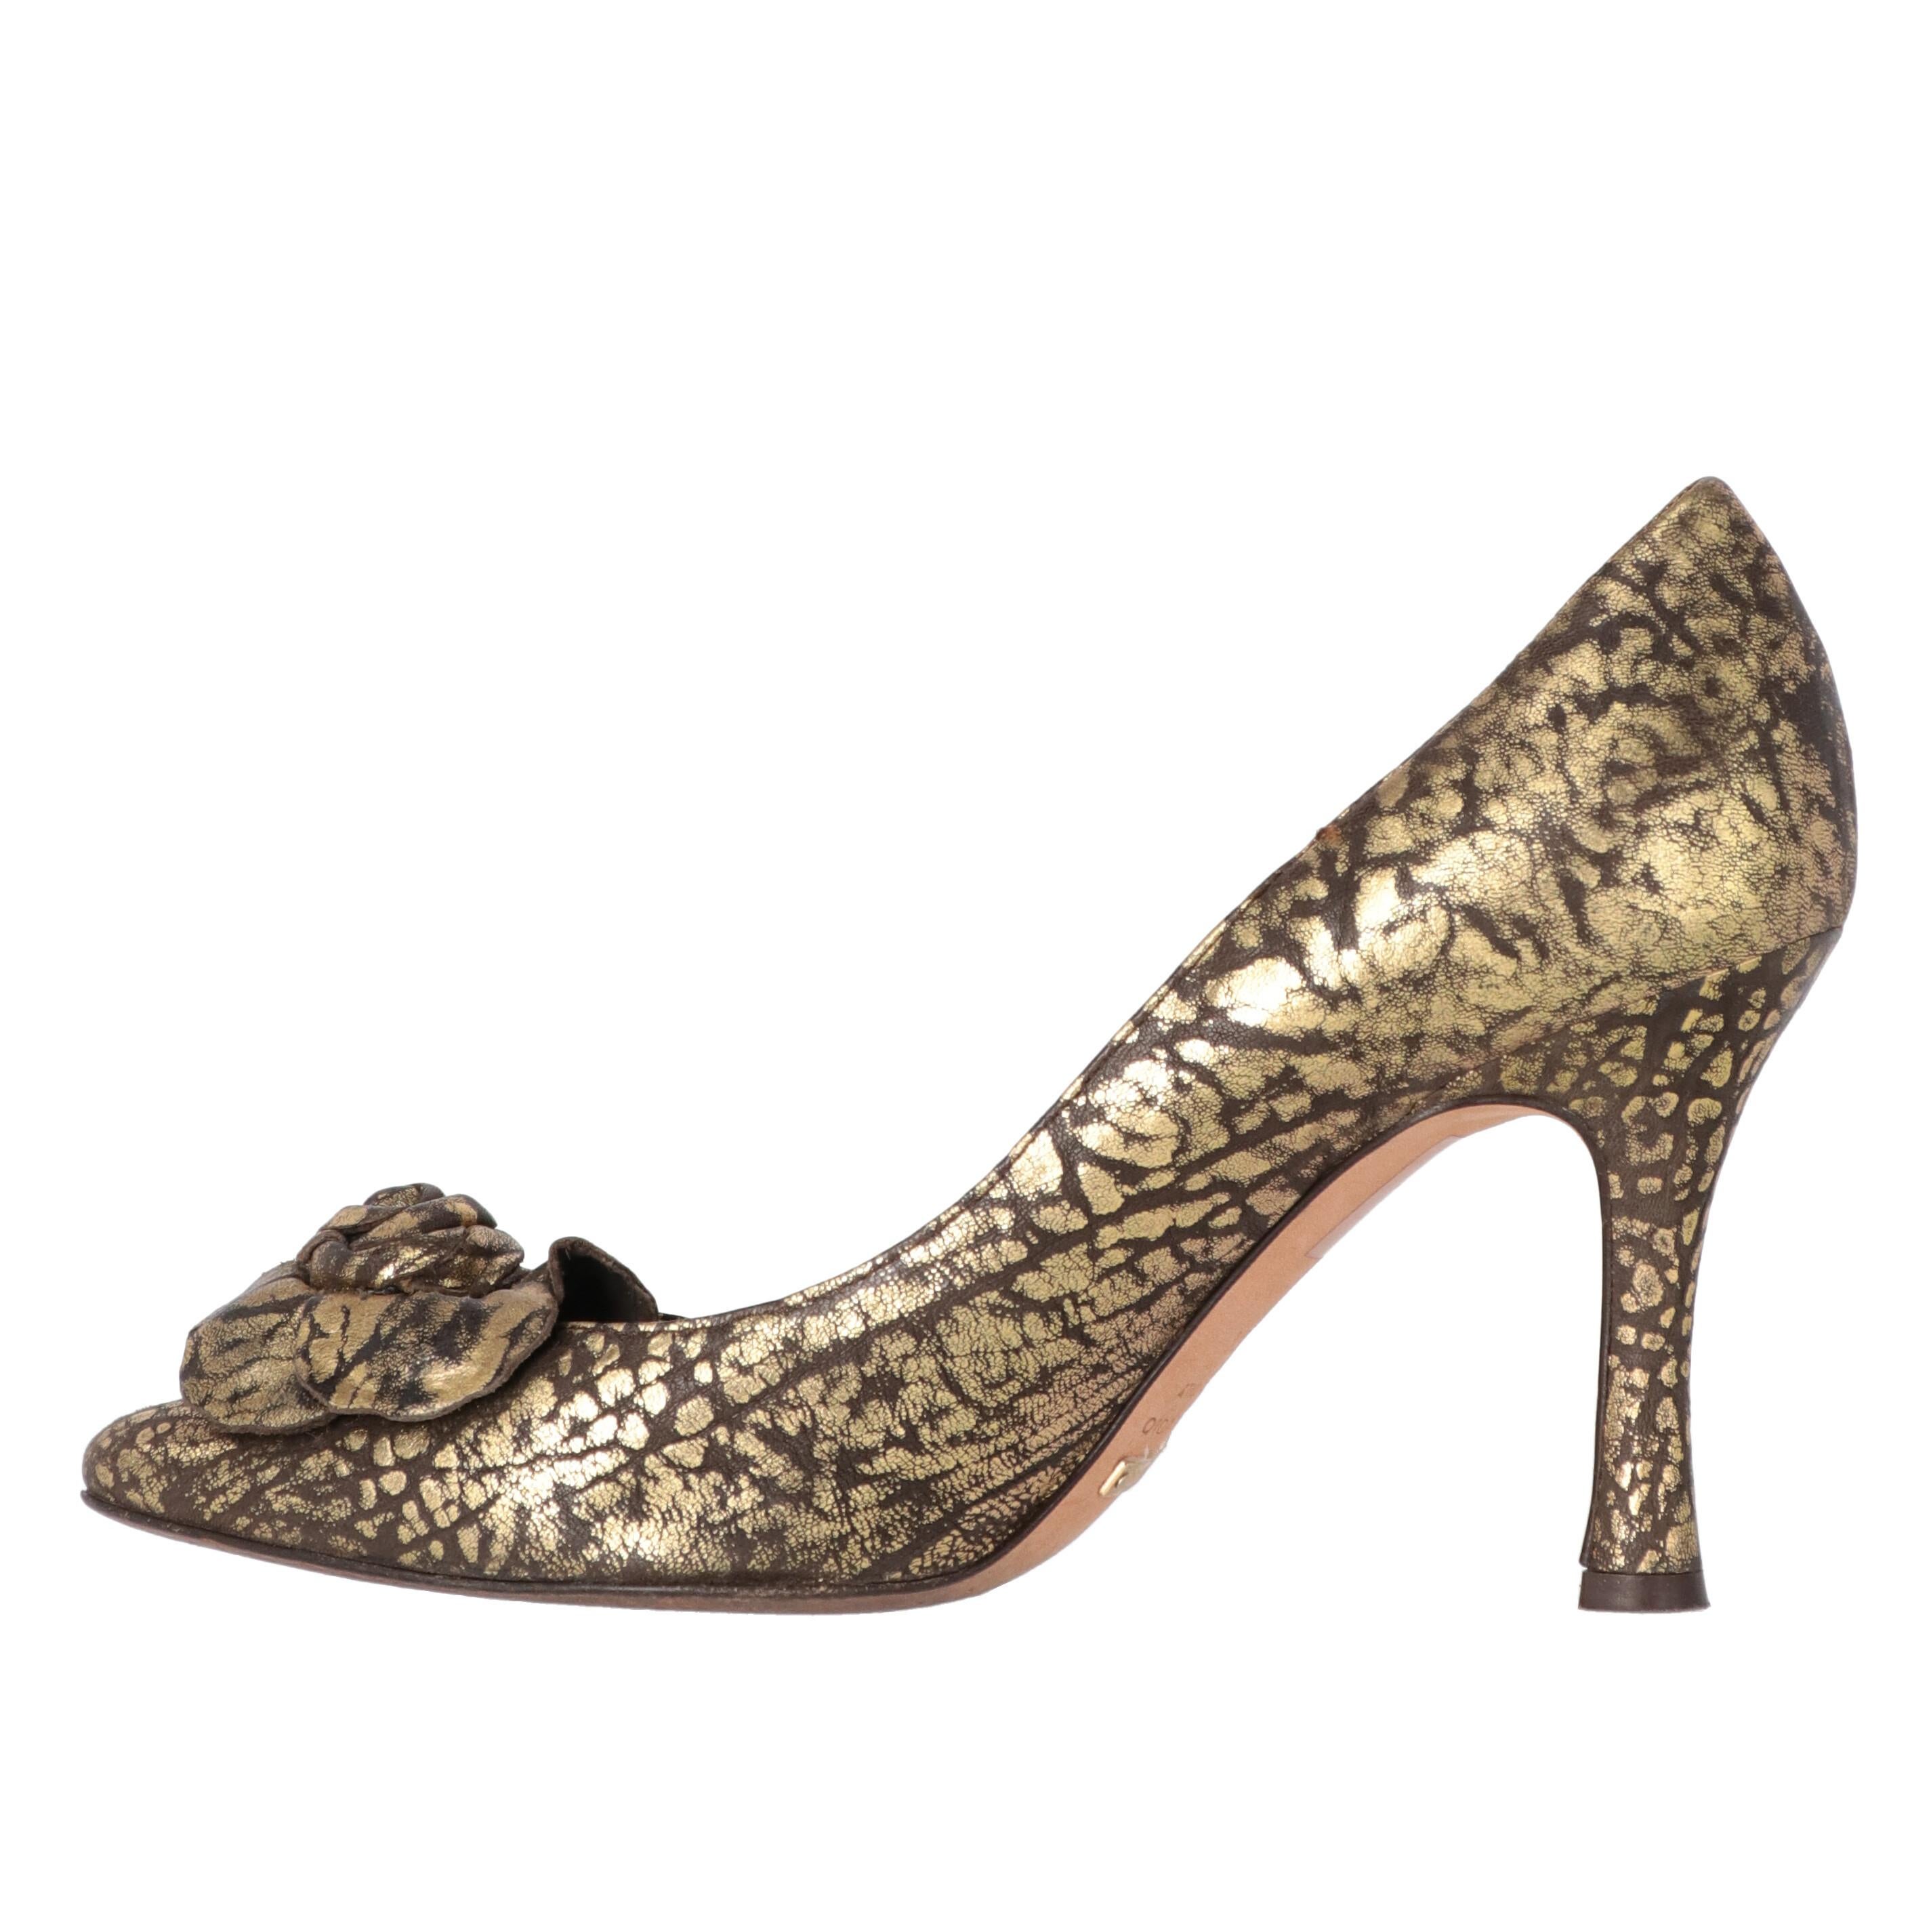 Dolce & Gabbana brown leather with all-over spotted print décolleté. Pointed model with decorative applied flower and stiletto heel. Leather insole.

The product has some creases due to use, as shown in the pictures.

Years: 90s

Made in